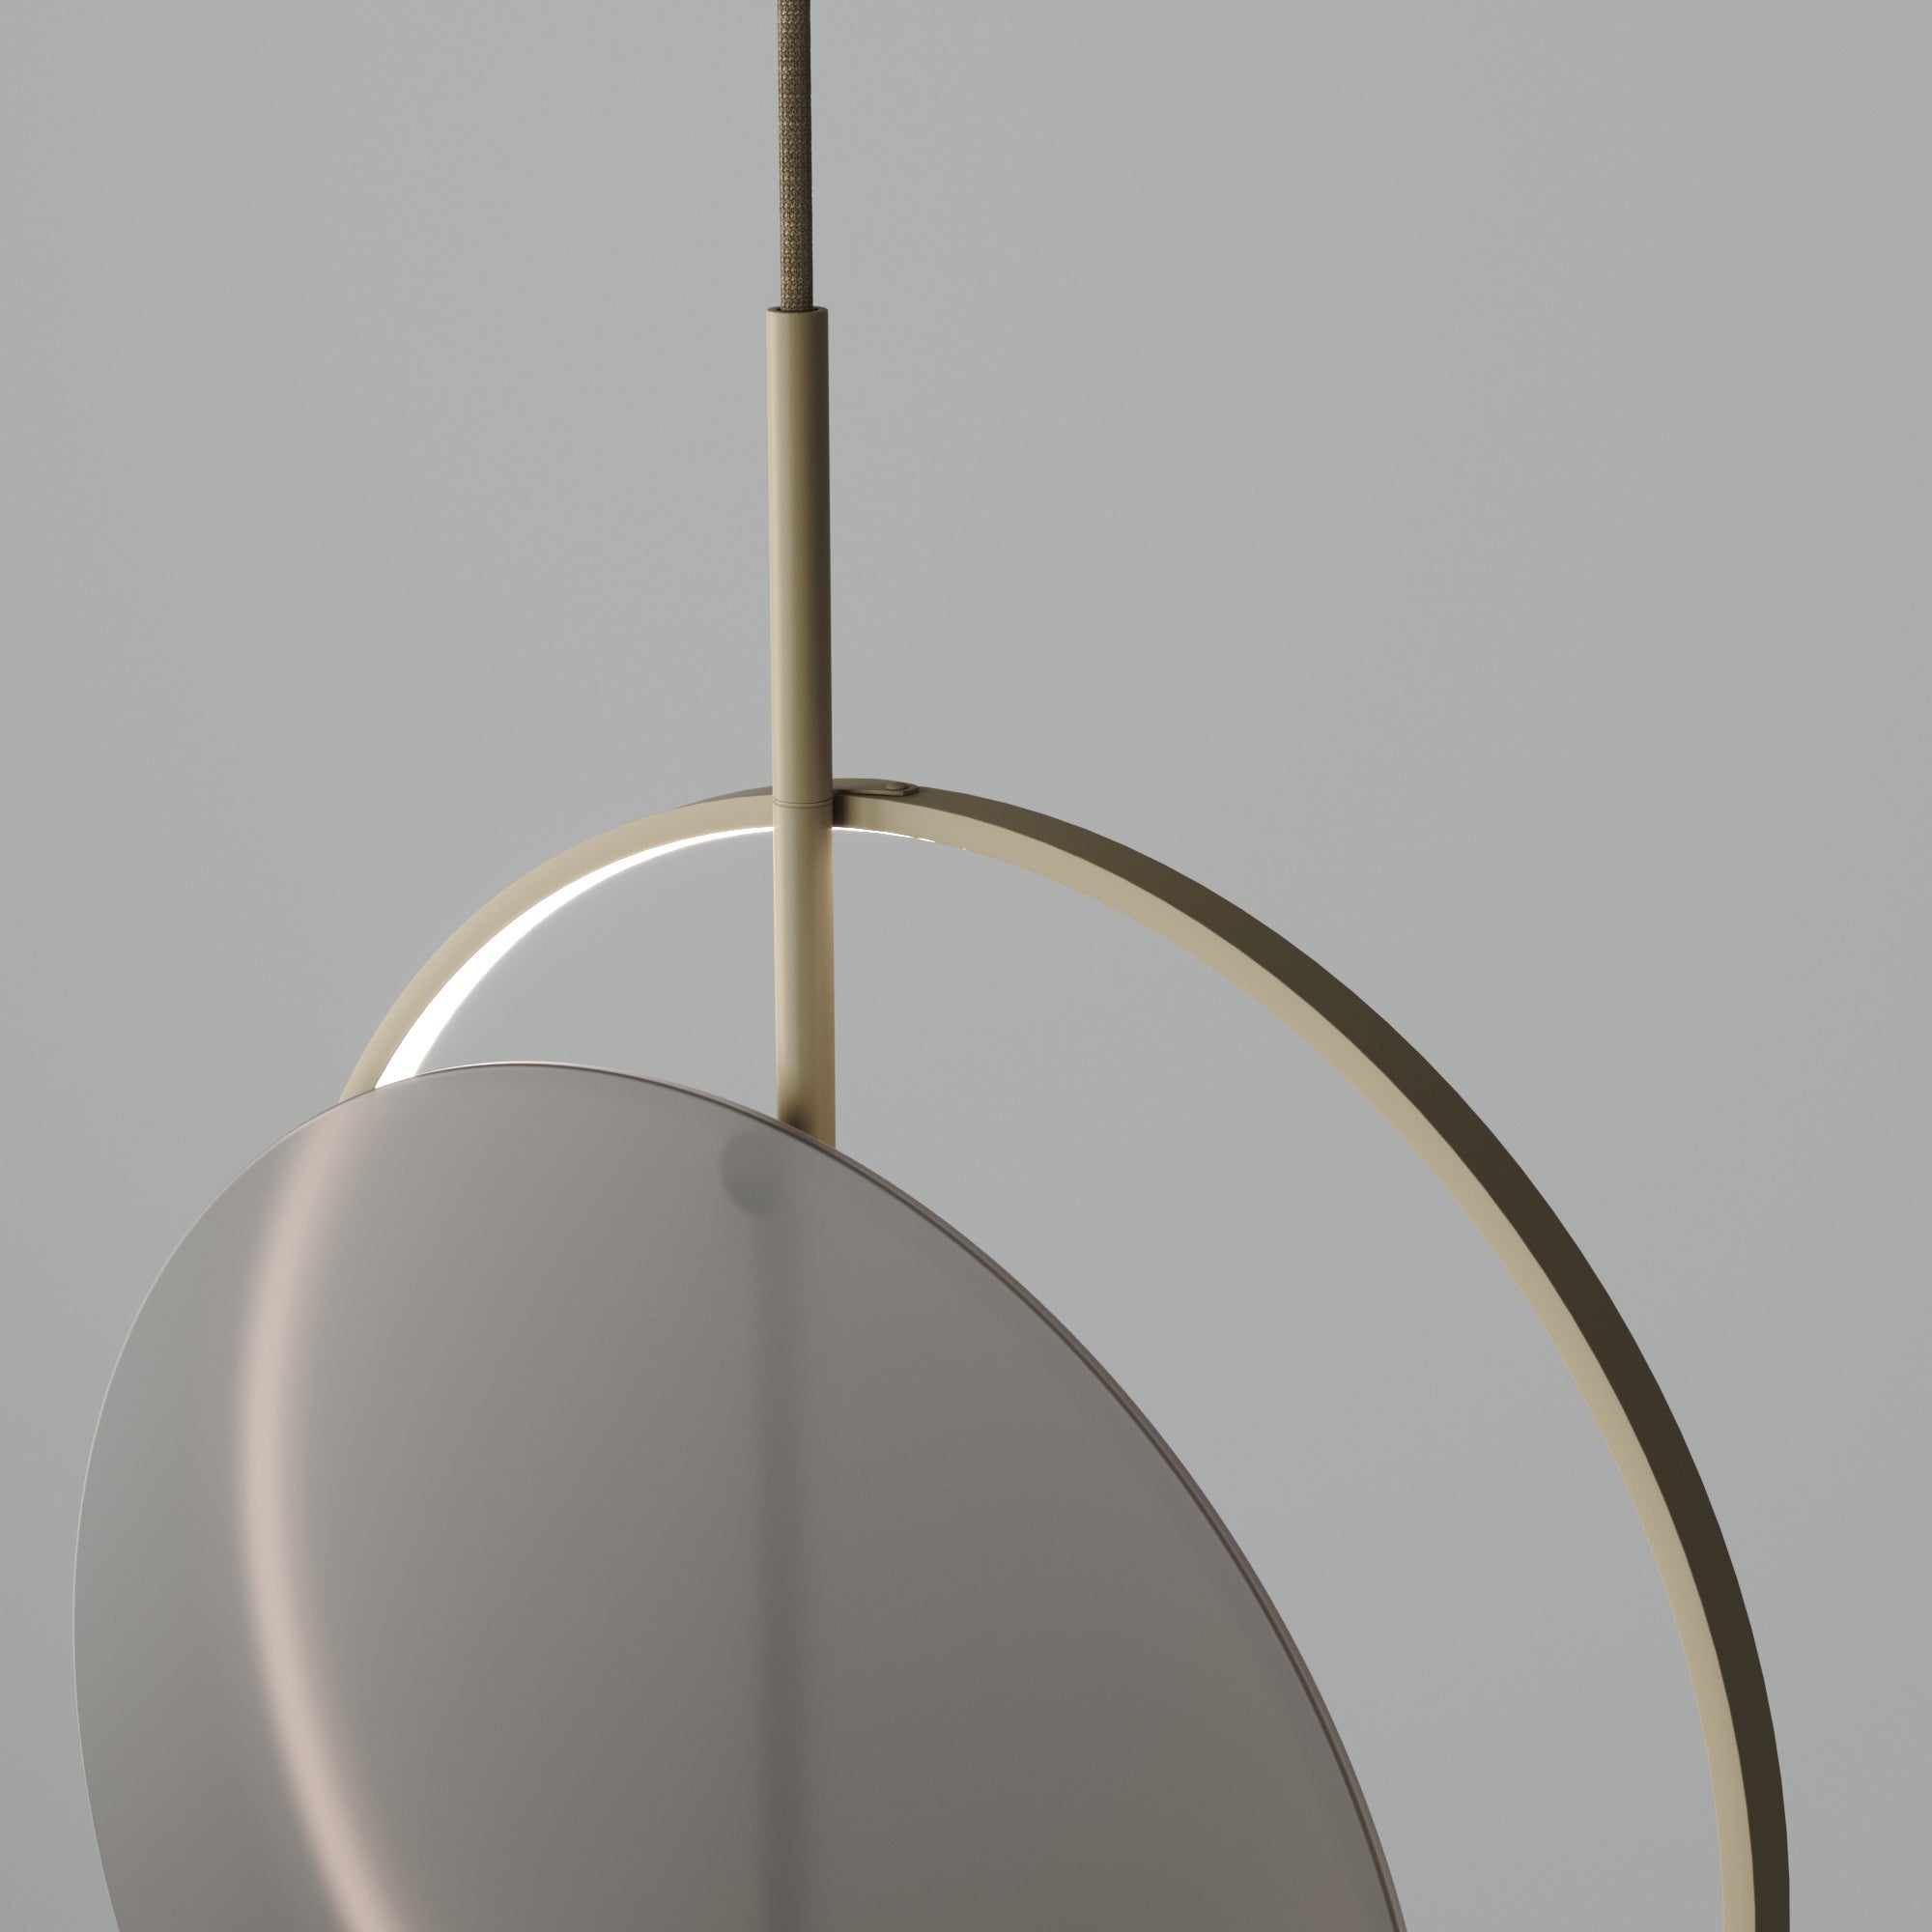 Mid glaas lighting

Product name: Mid glaas
Category: Lighting
Type: Ceiling light
Material: frosted glass bronze, steel, aluminium, textile cable.
Overall dimensions: H: 620 mm / W: 500 mm.
Light source: LED stripe, 2340 Lum, driver